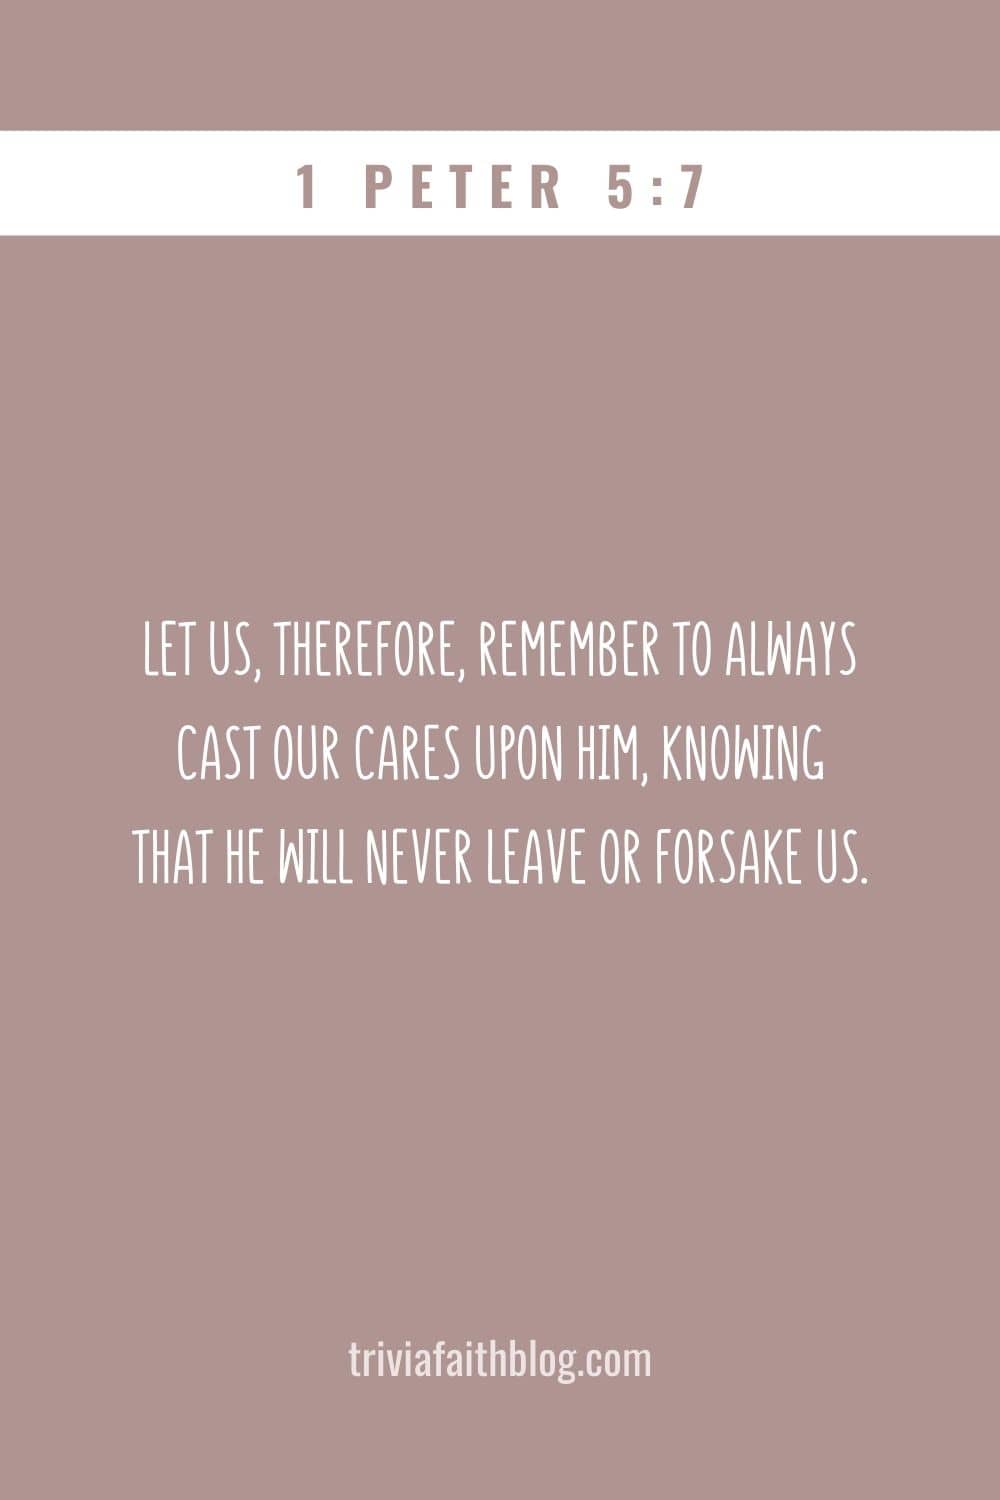 Let us, therefore, remember to always cast our cares upon Him, knowing that He will never leave or forsake us